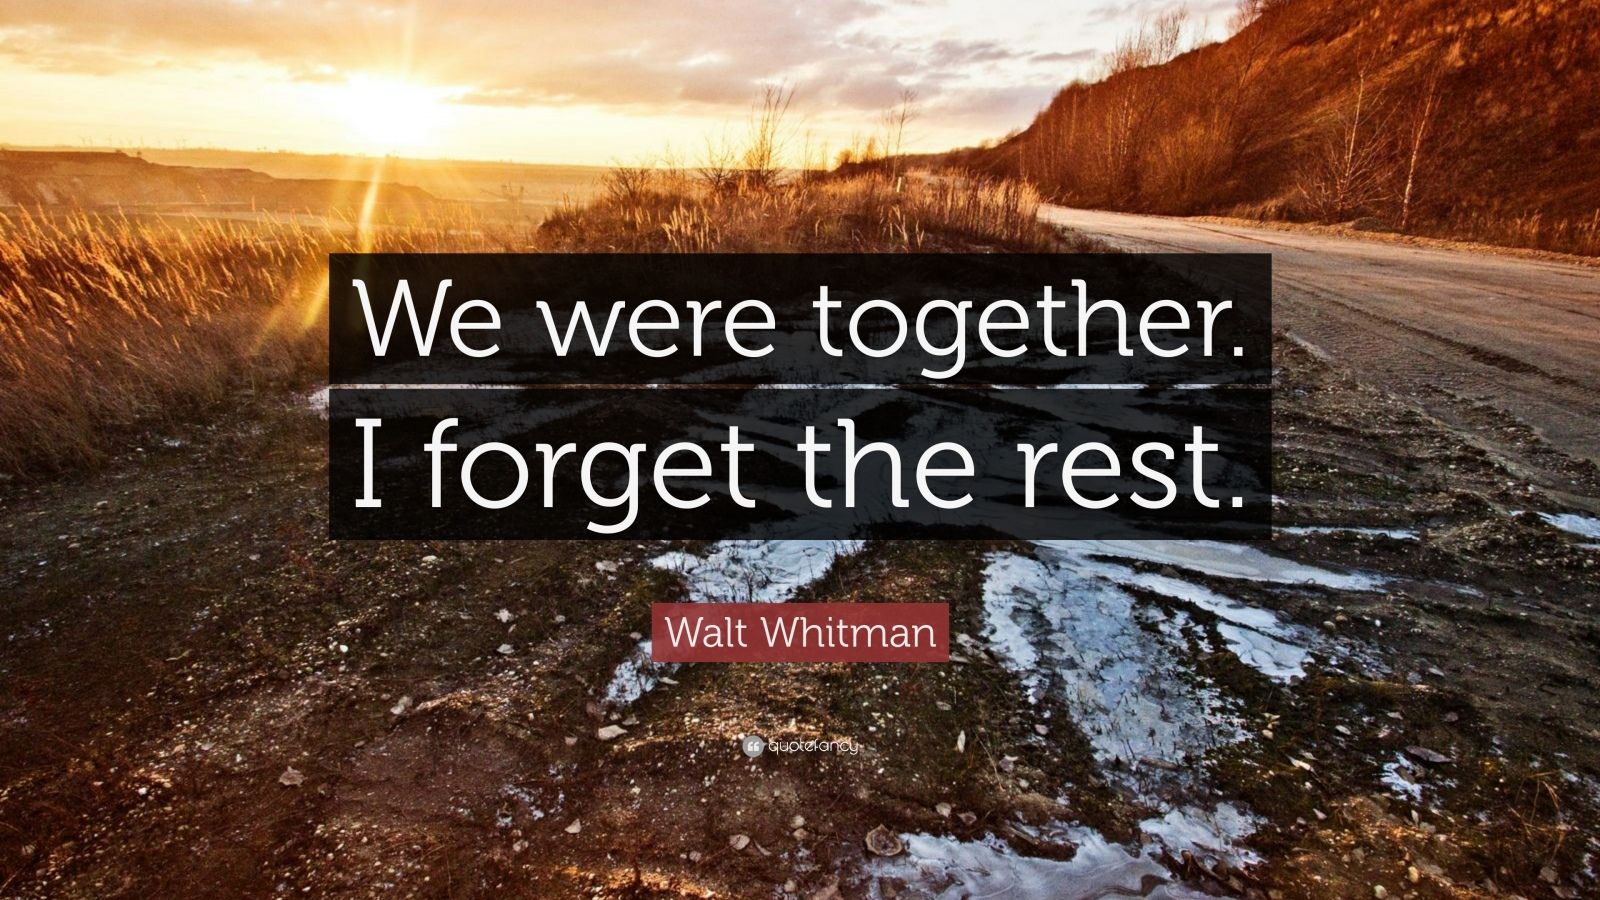 Walt Whitman Quote “We were together. I the rest